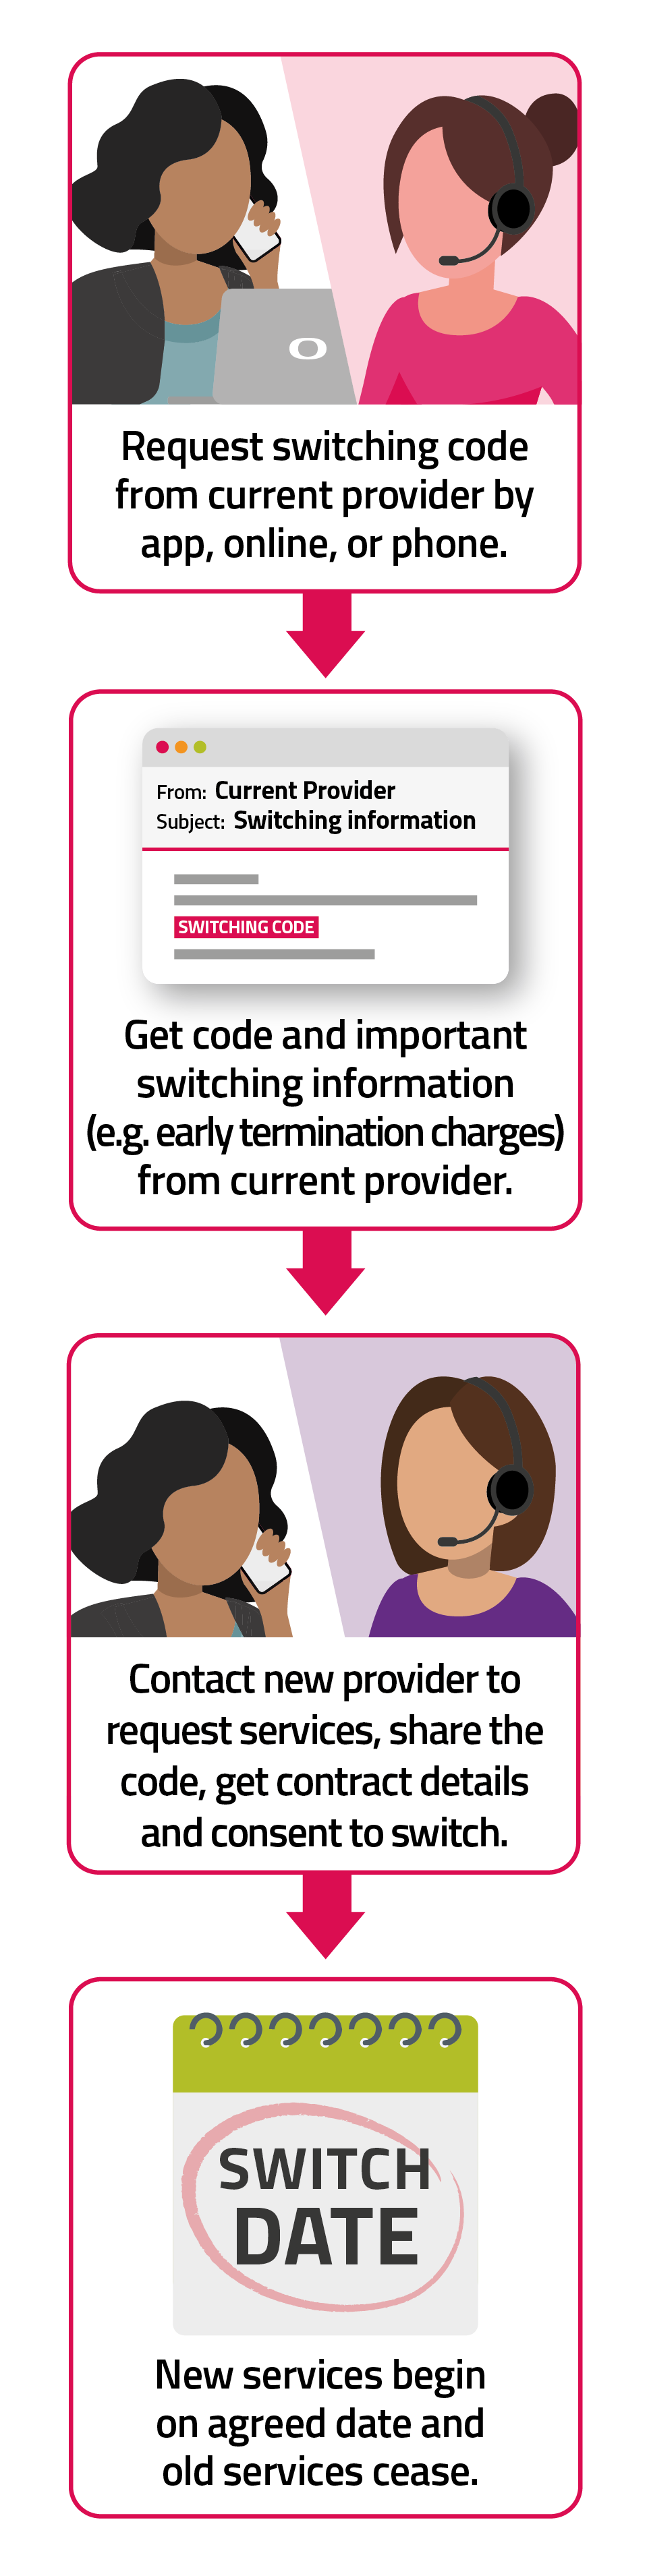 Under Code to Switch, a customer must first contact their current provider by app, online or phone to get information about the implications of switching as well as a switching code. If they decide they want to go ahead with the switch after considering the switching information, they contact the new provider and give them the switching code. The new provider then manages the switch.